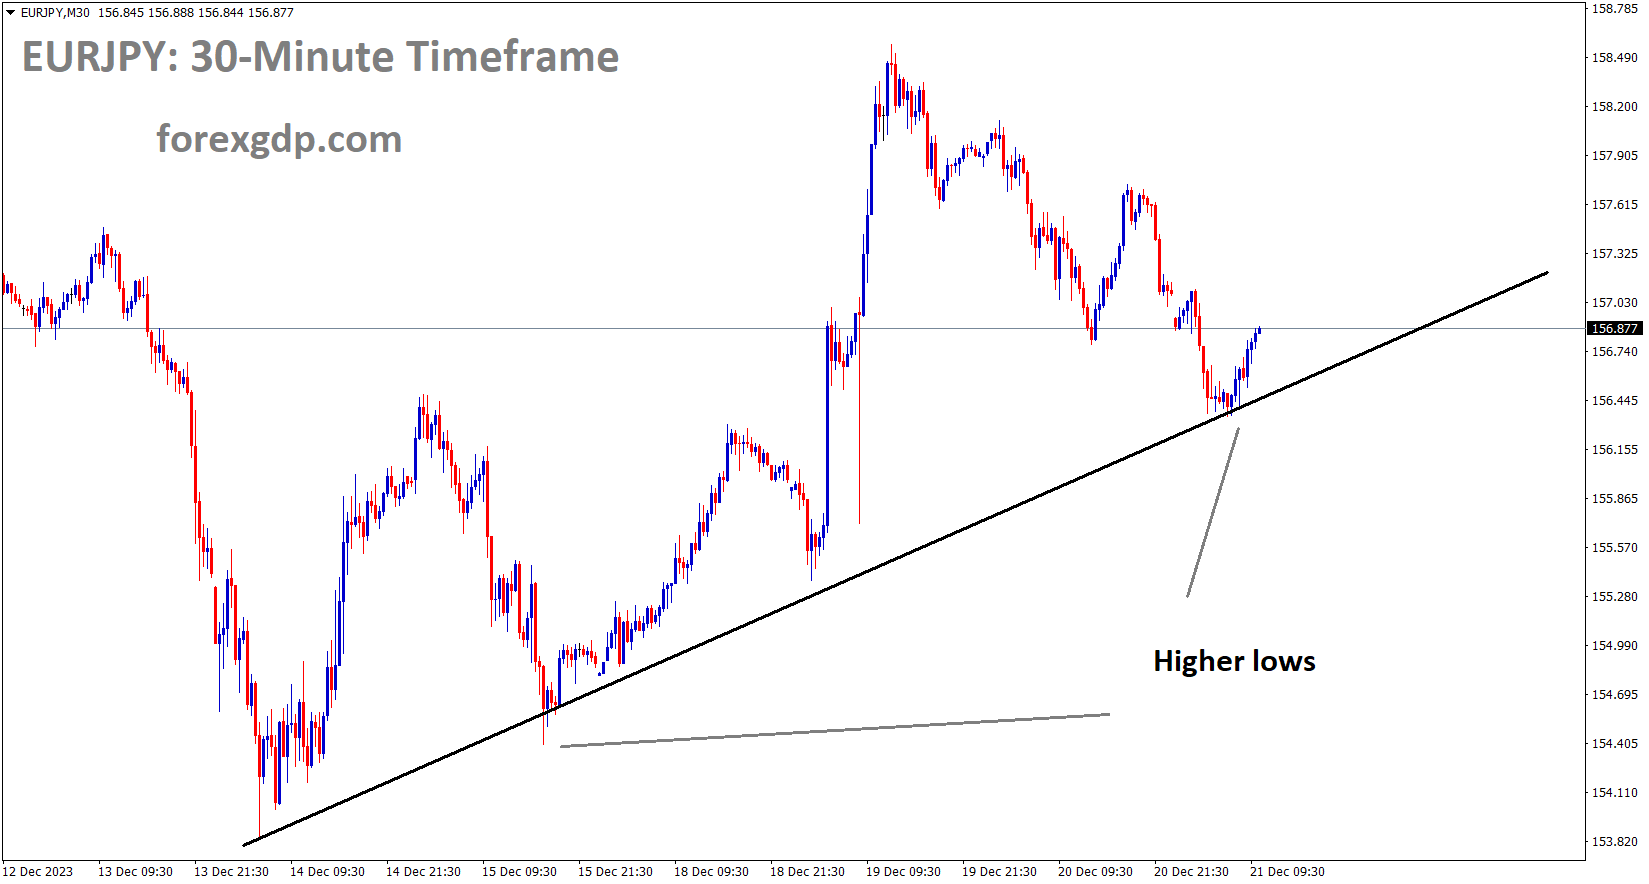 EURJPY is moving in an Uptrend line and the market has rebounded from the higher low area of the trend line